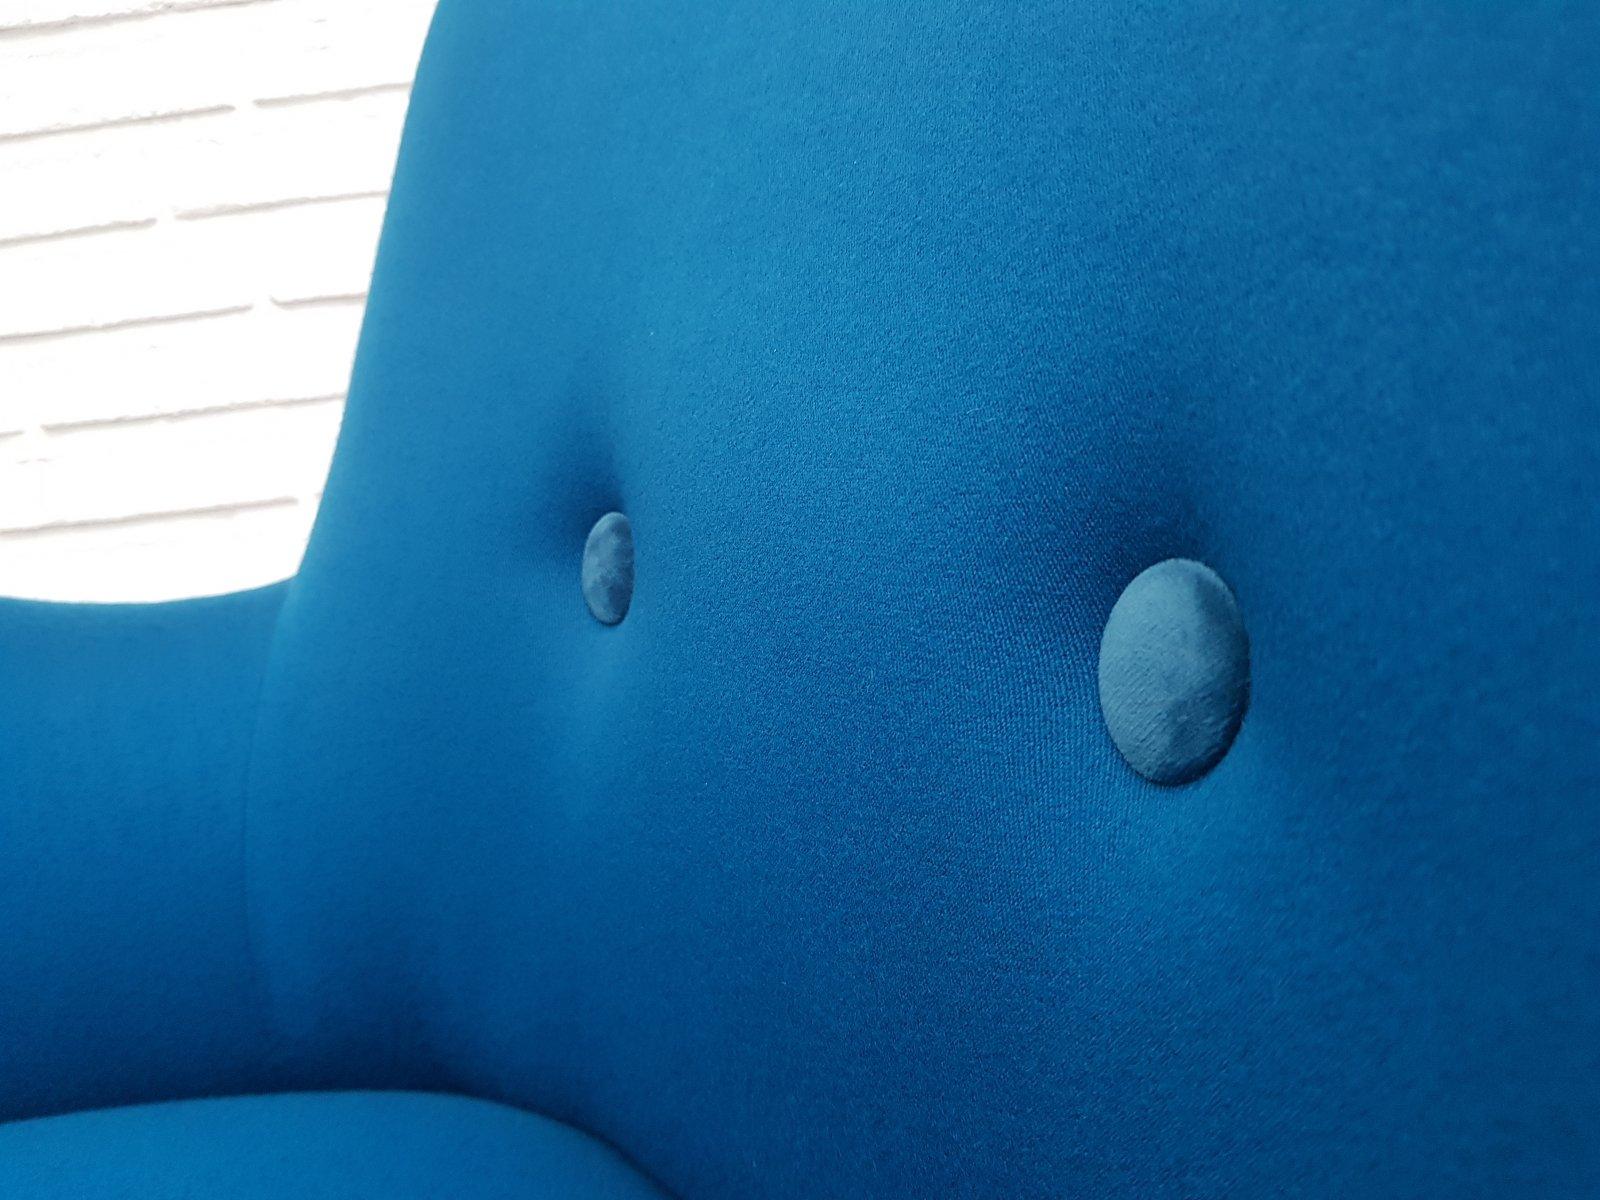 Danish designed armchair. New reupholstered in quality turquoise blue wool fabric. Velour buttons. Renovated, reupholstered by professional furniture upholsterer at Retro Møbler Galleri. Made by Danish furniture manufacturer in about 1970. The seat